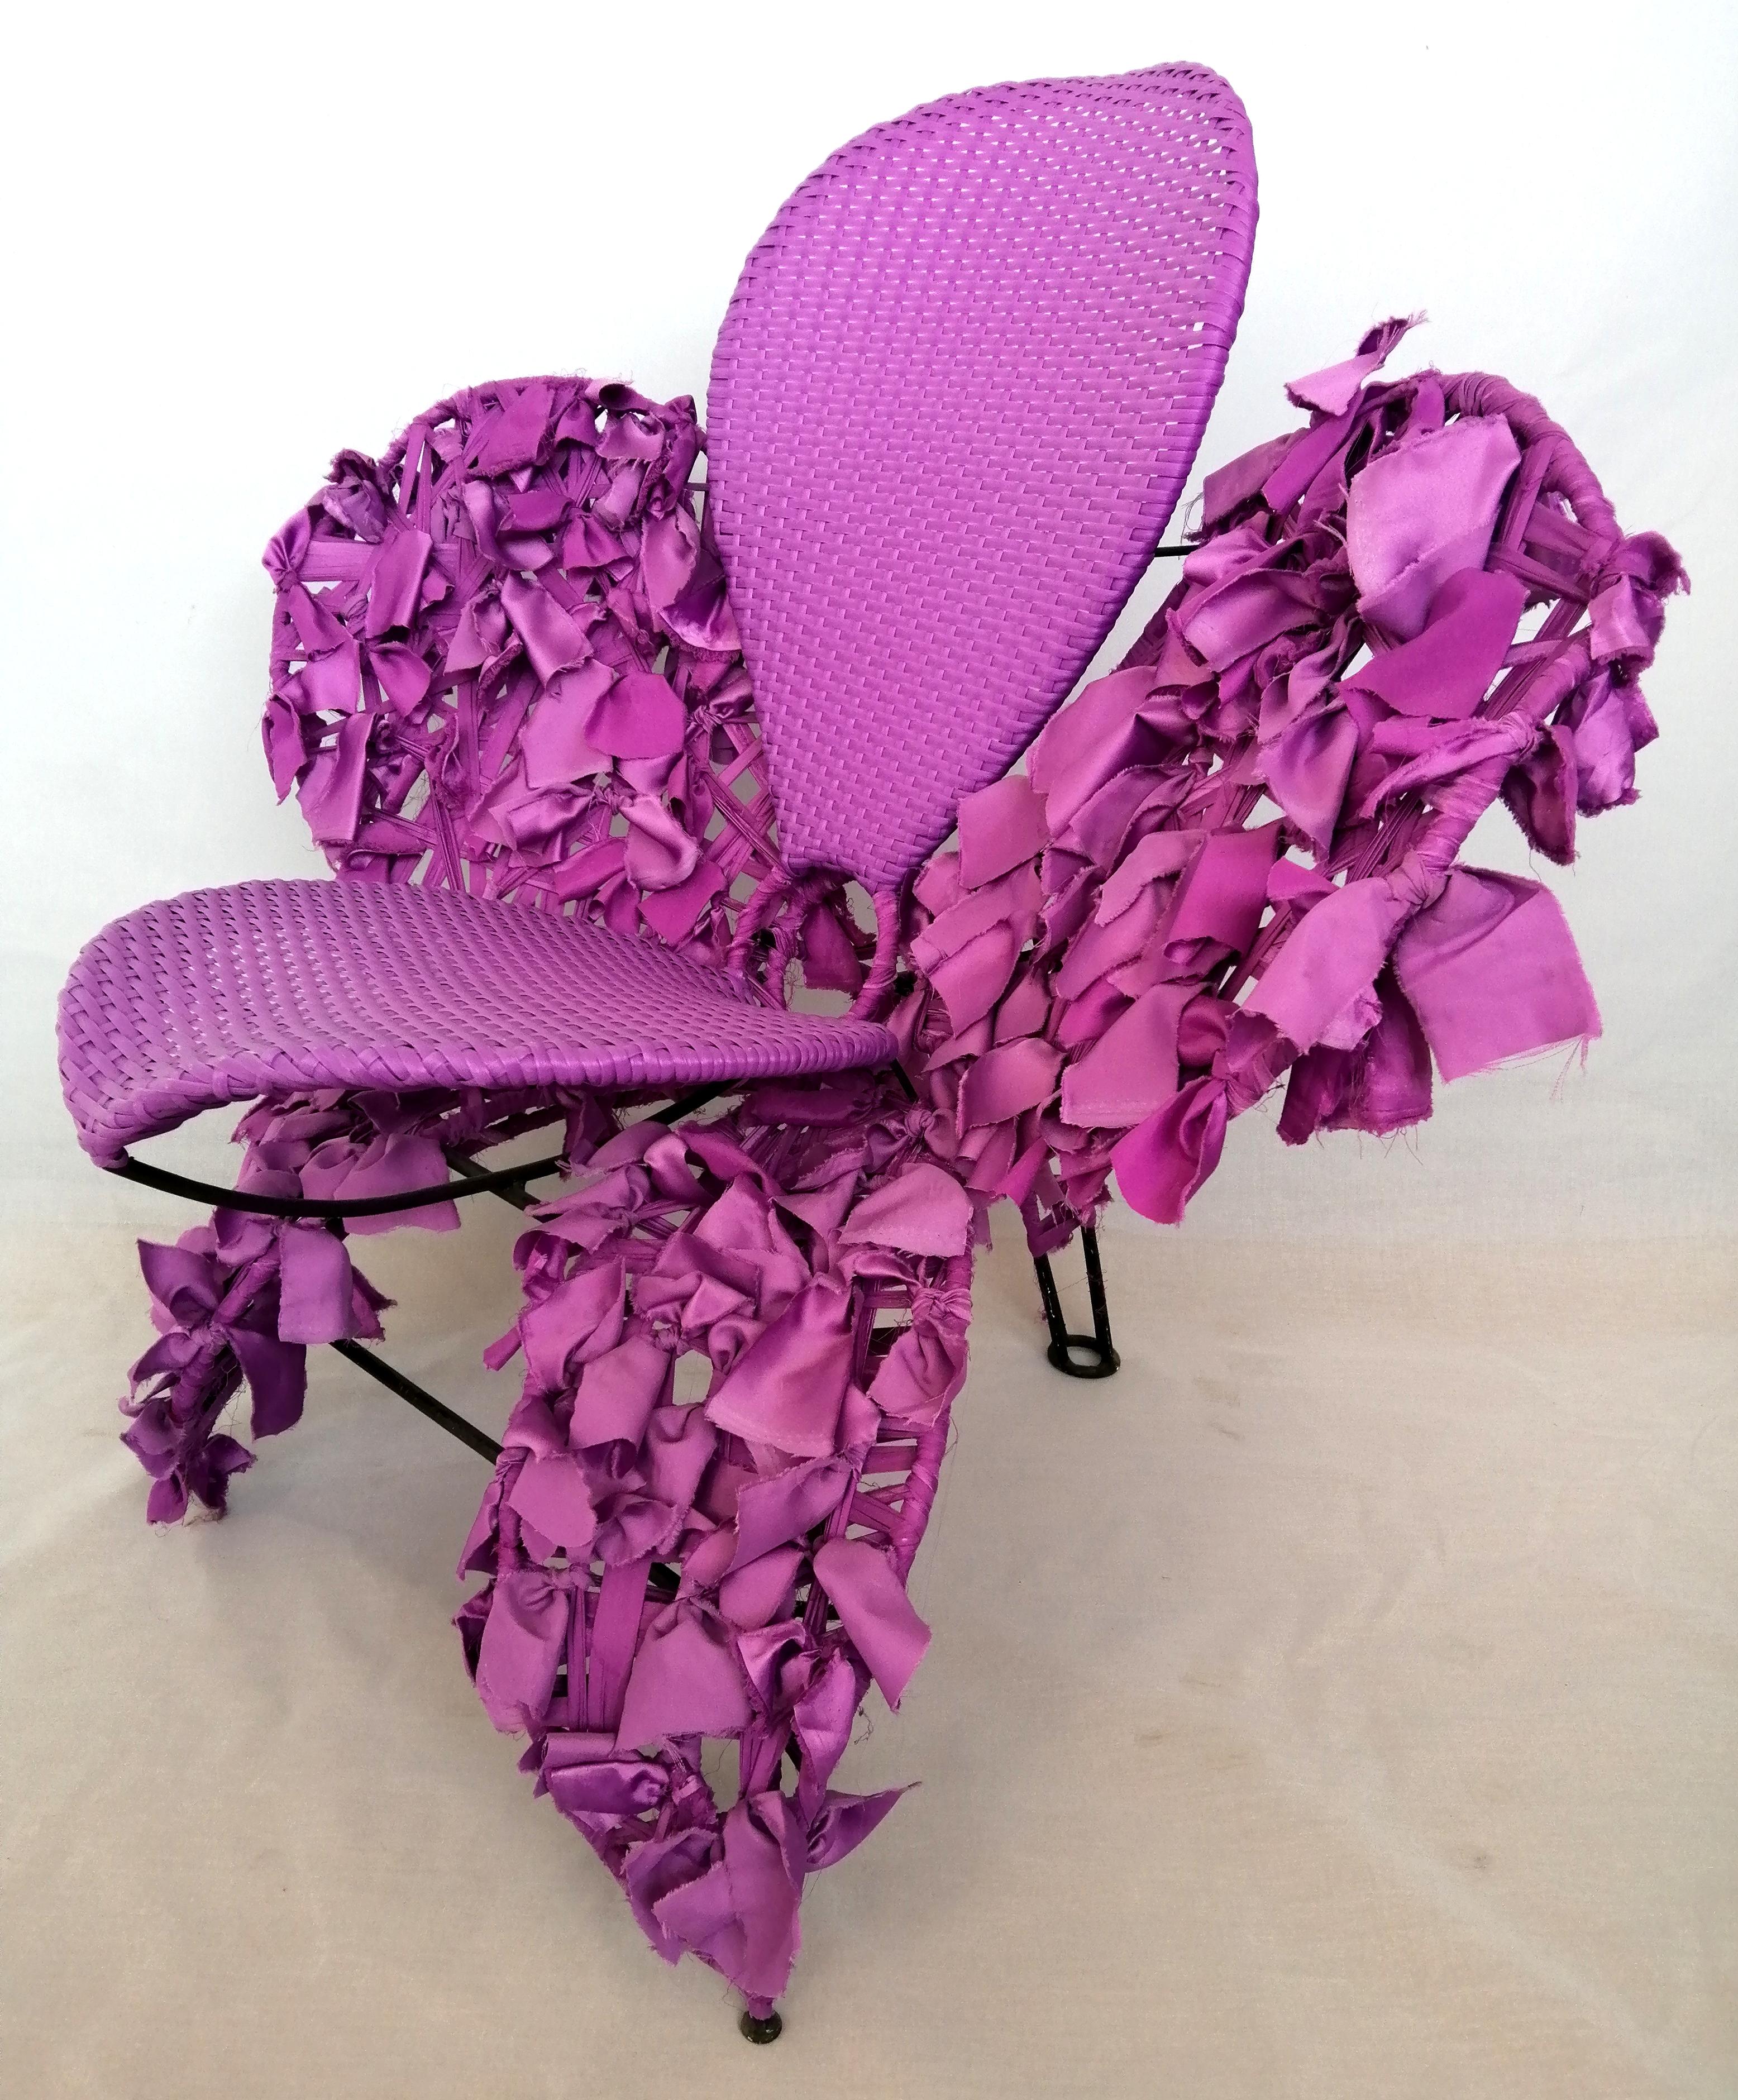 Construction technique: iron structure covered with flakes and plastic
Color: violet.
 